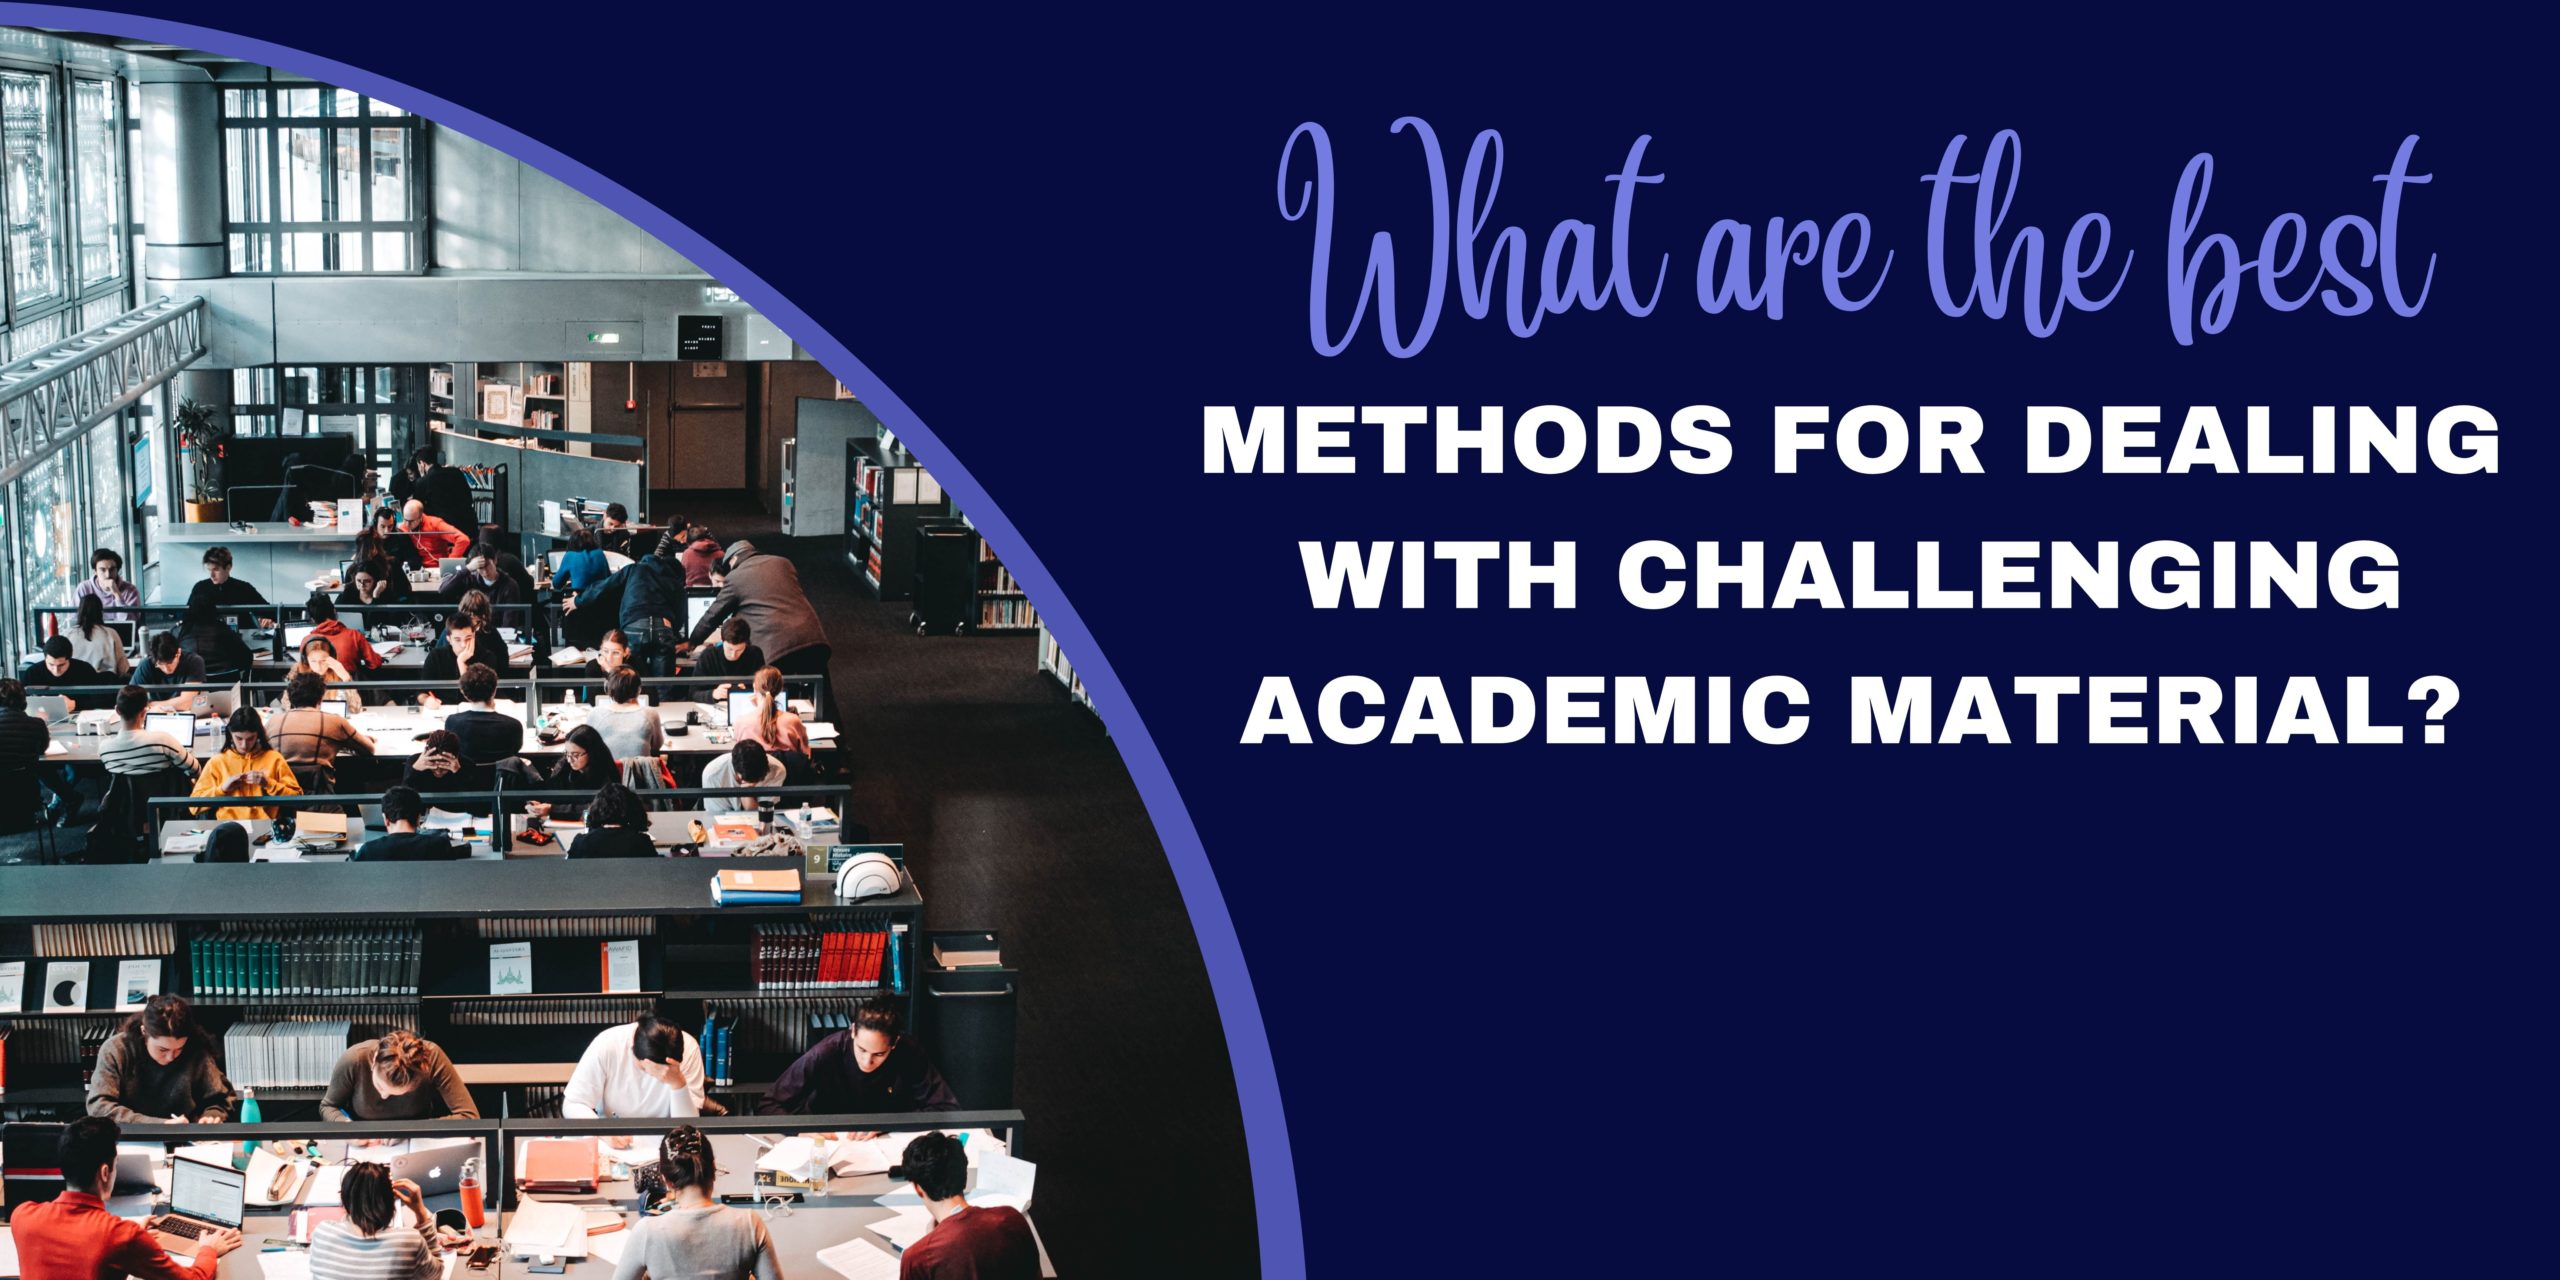 What are the best methods for dealing with challenging academic material